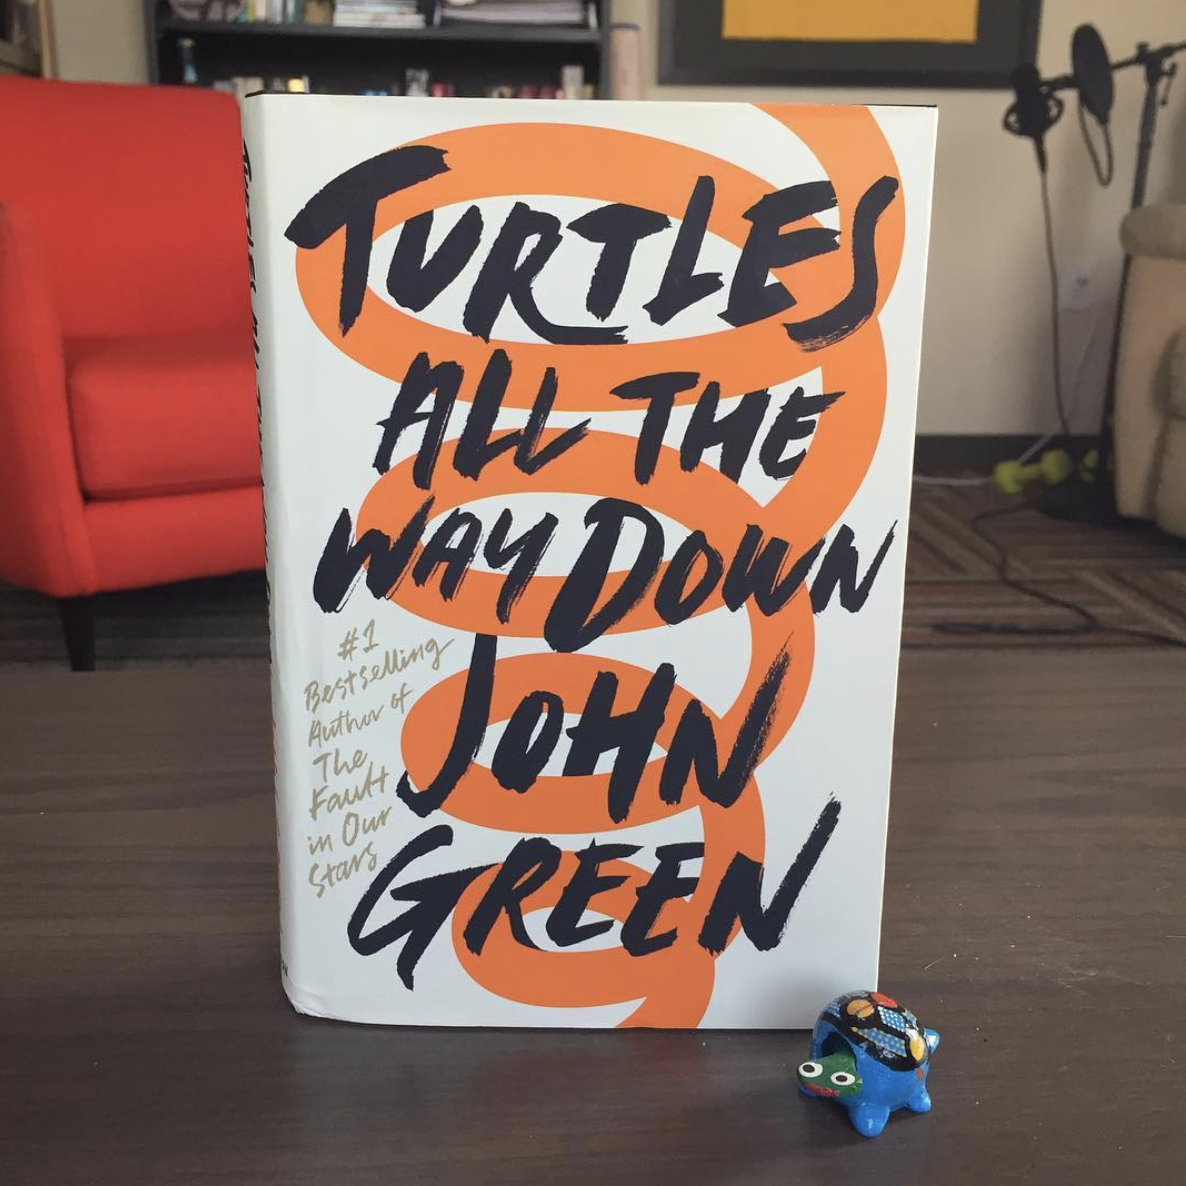 the book on a table with a small turtle figurine next to it